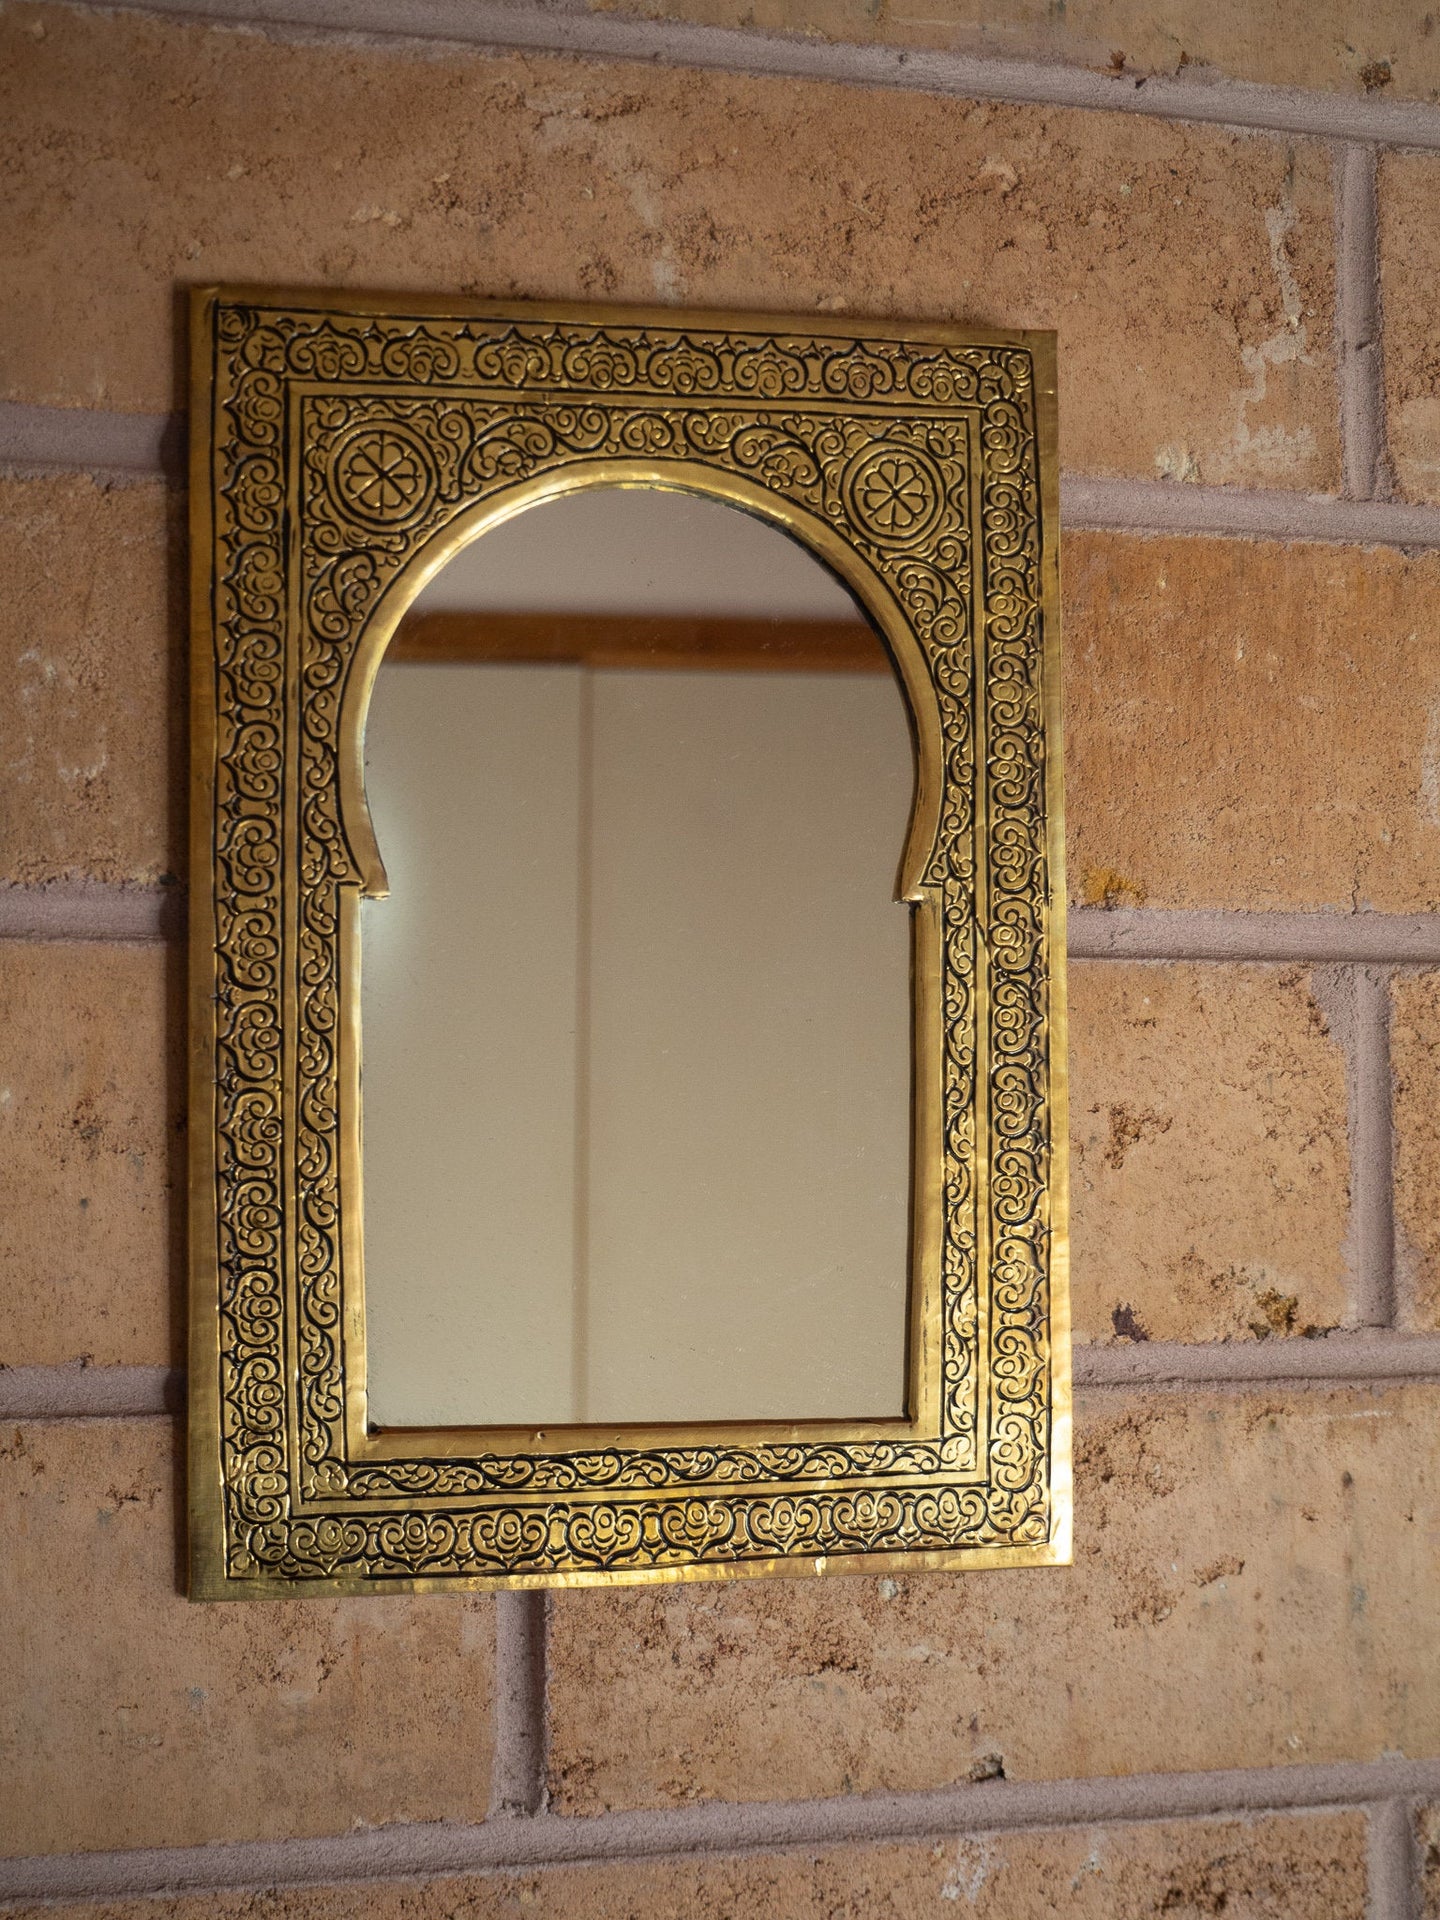 full view of the brass mirror